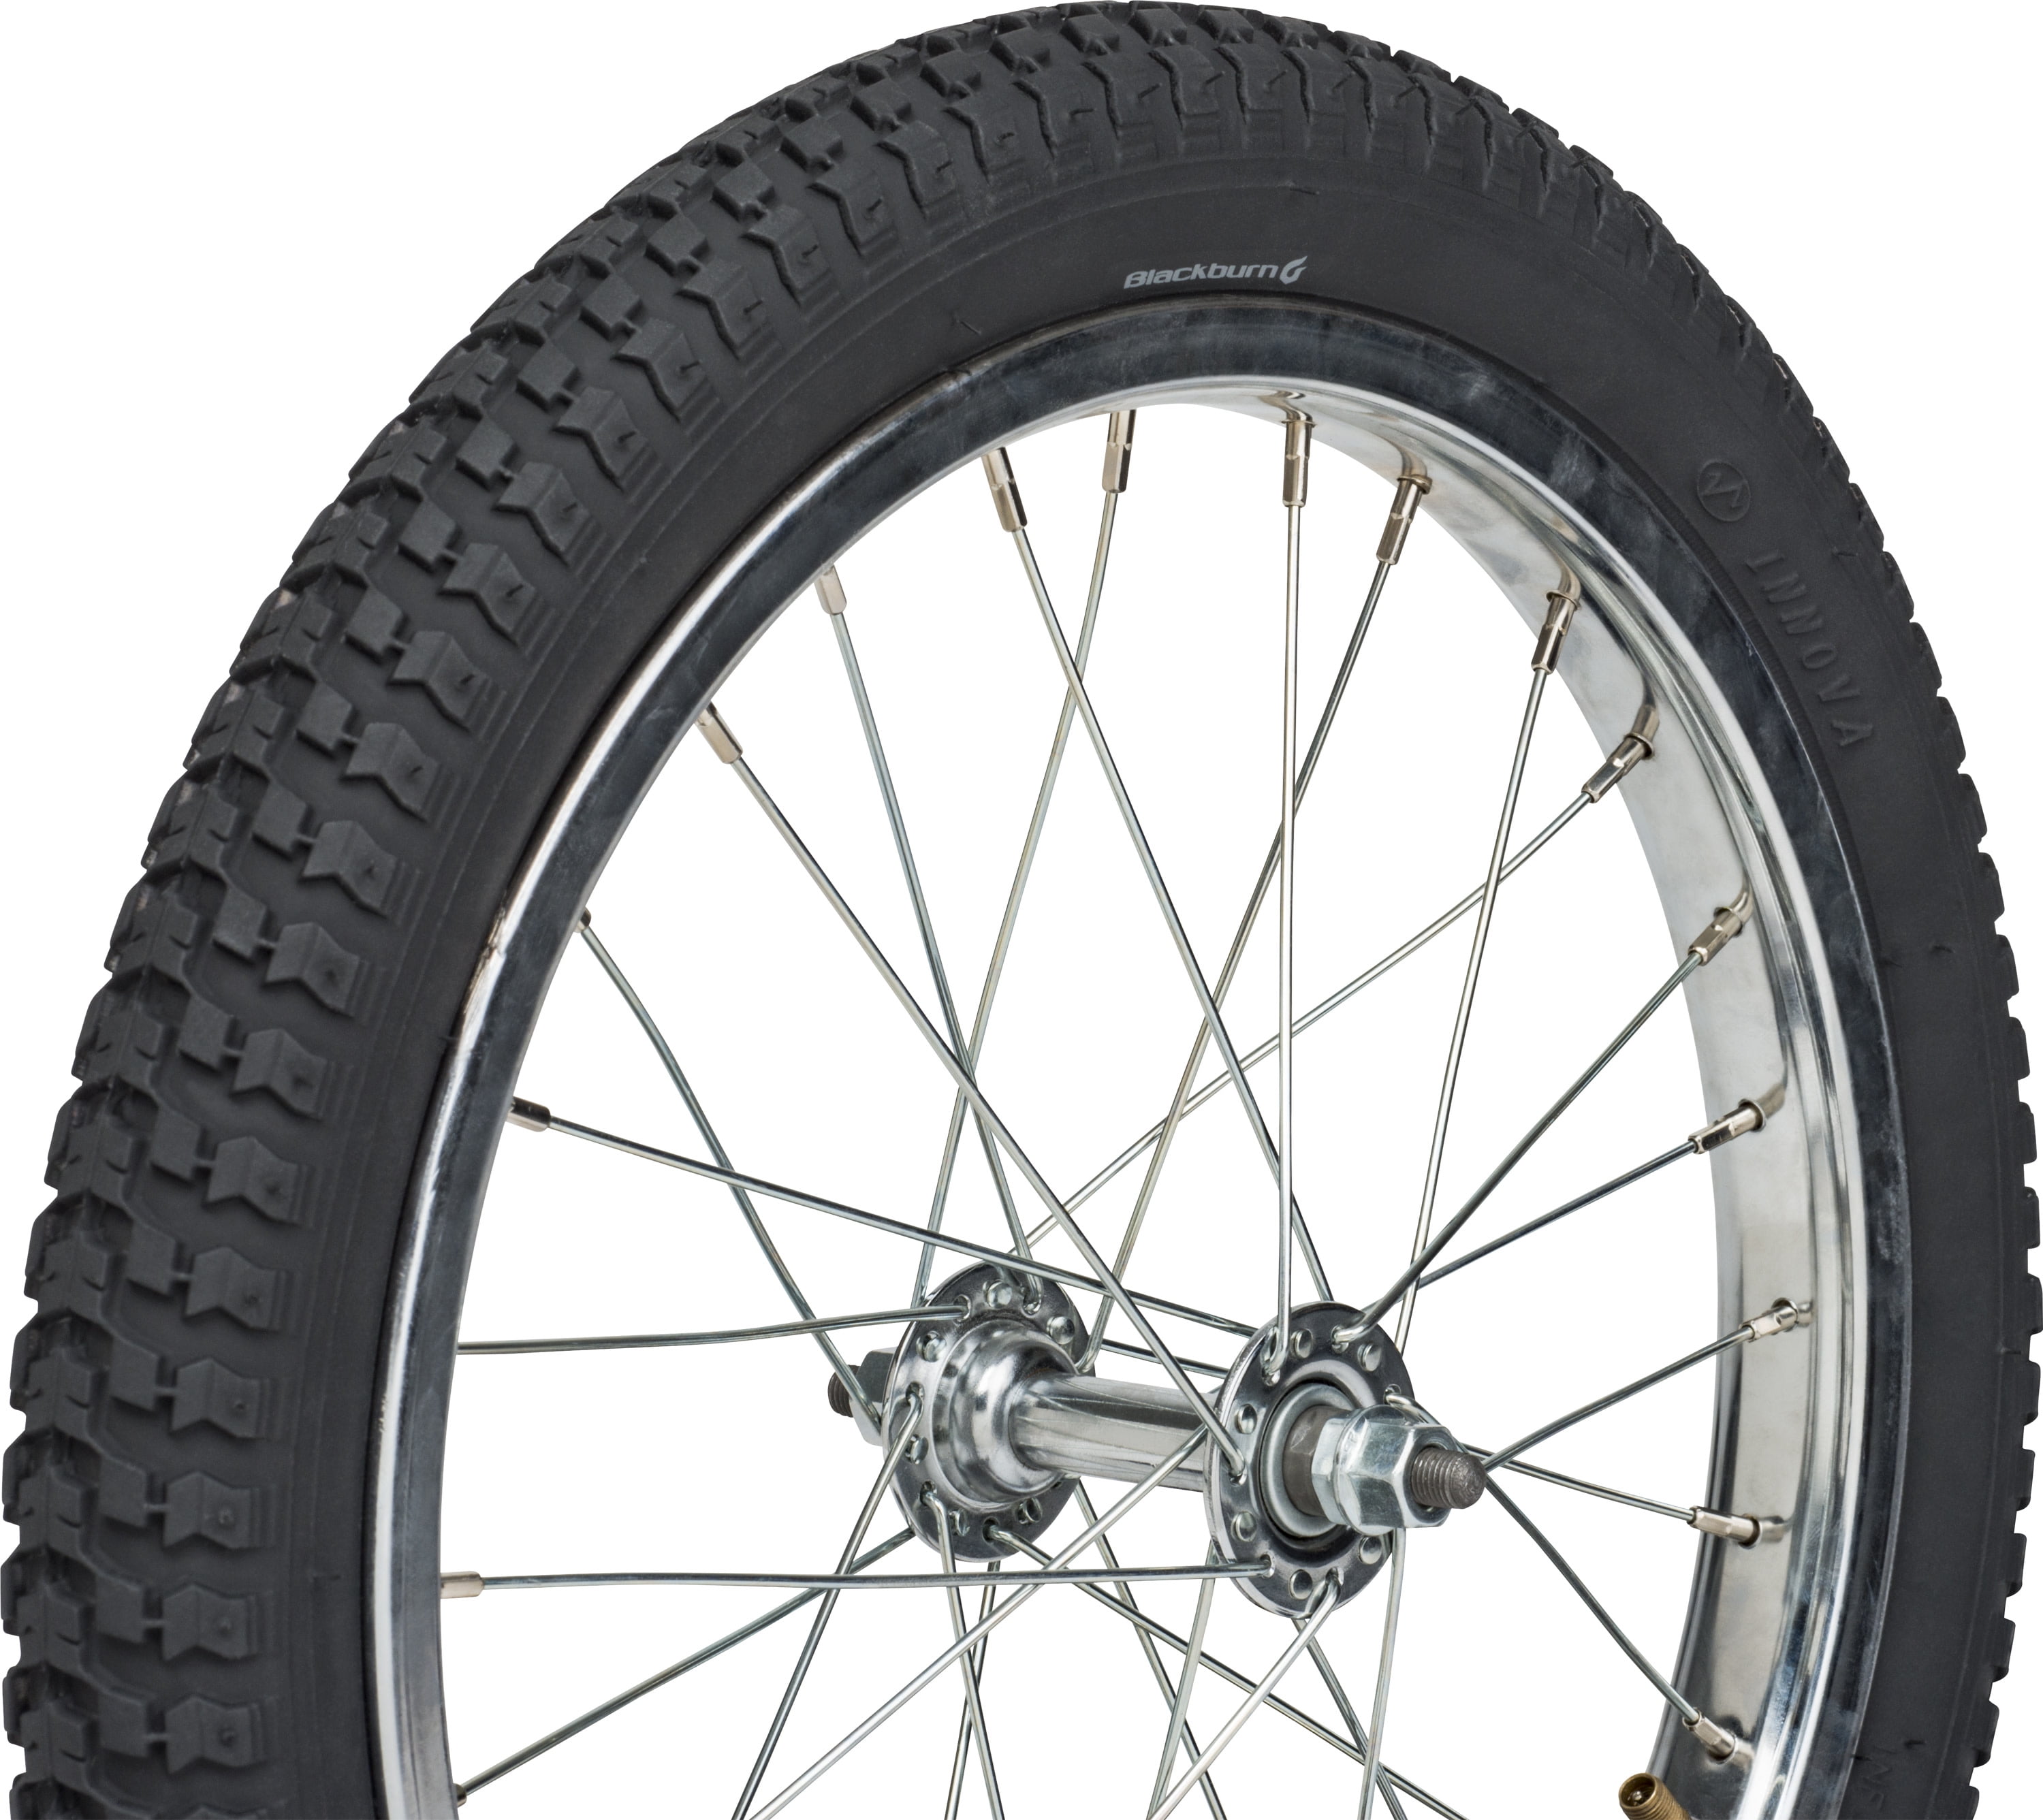 2.125 Black Comp 2 Style skinwall BMX tires pair Details about   20x1.75 